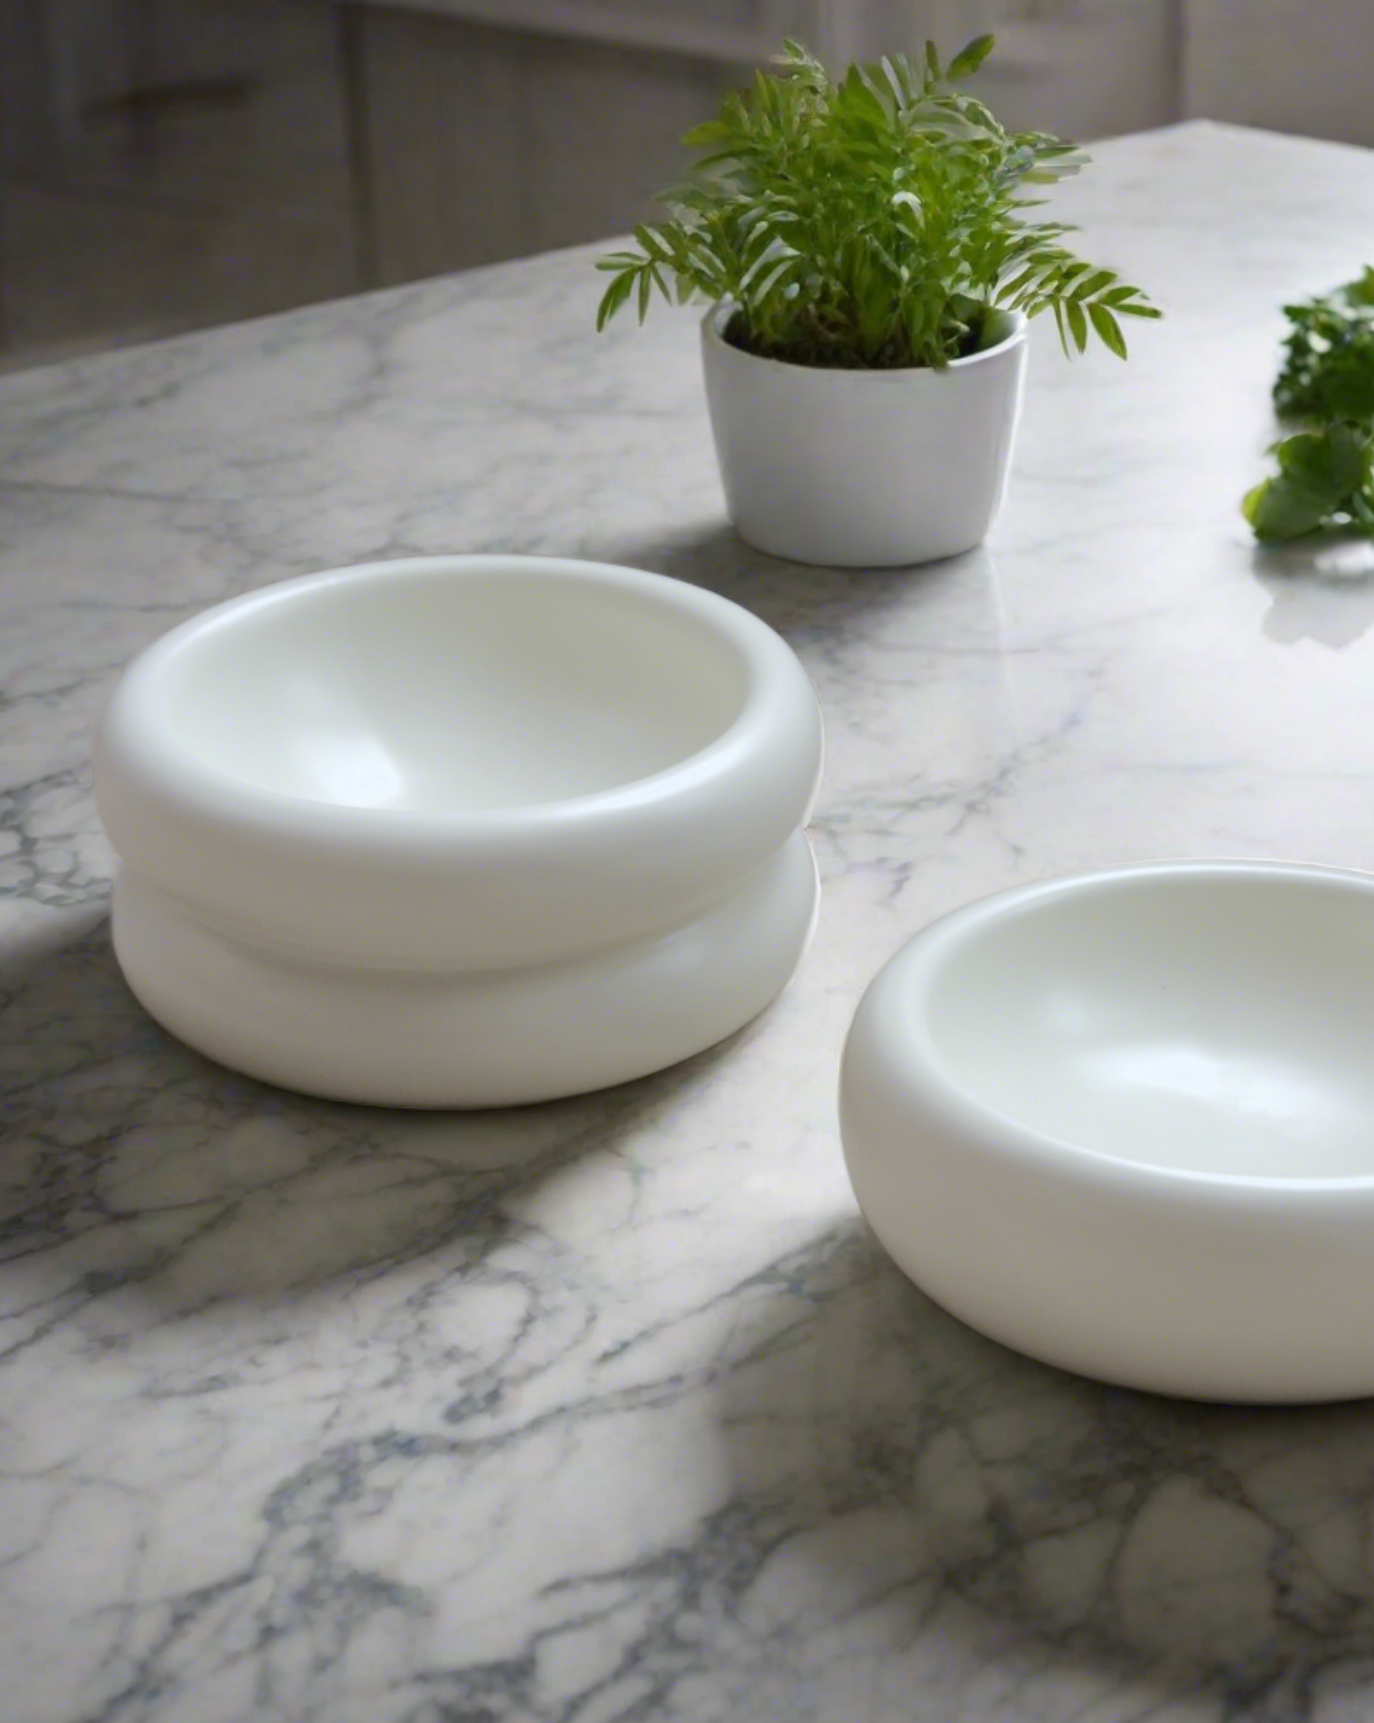 The Modern Muse Tall Pet Bowl is crafted from quality ceramic, which is both chic and practical. Home decor friendly, this bowl can be paired with the Modern Muse Low Pet Bowl for the perfect bowl combo.